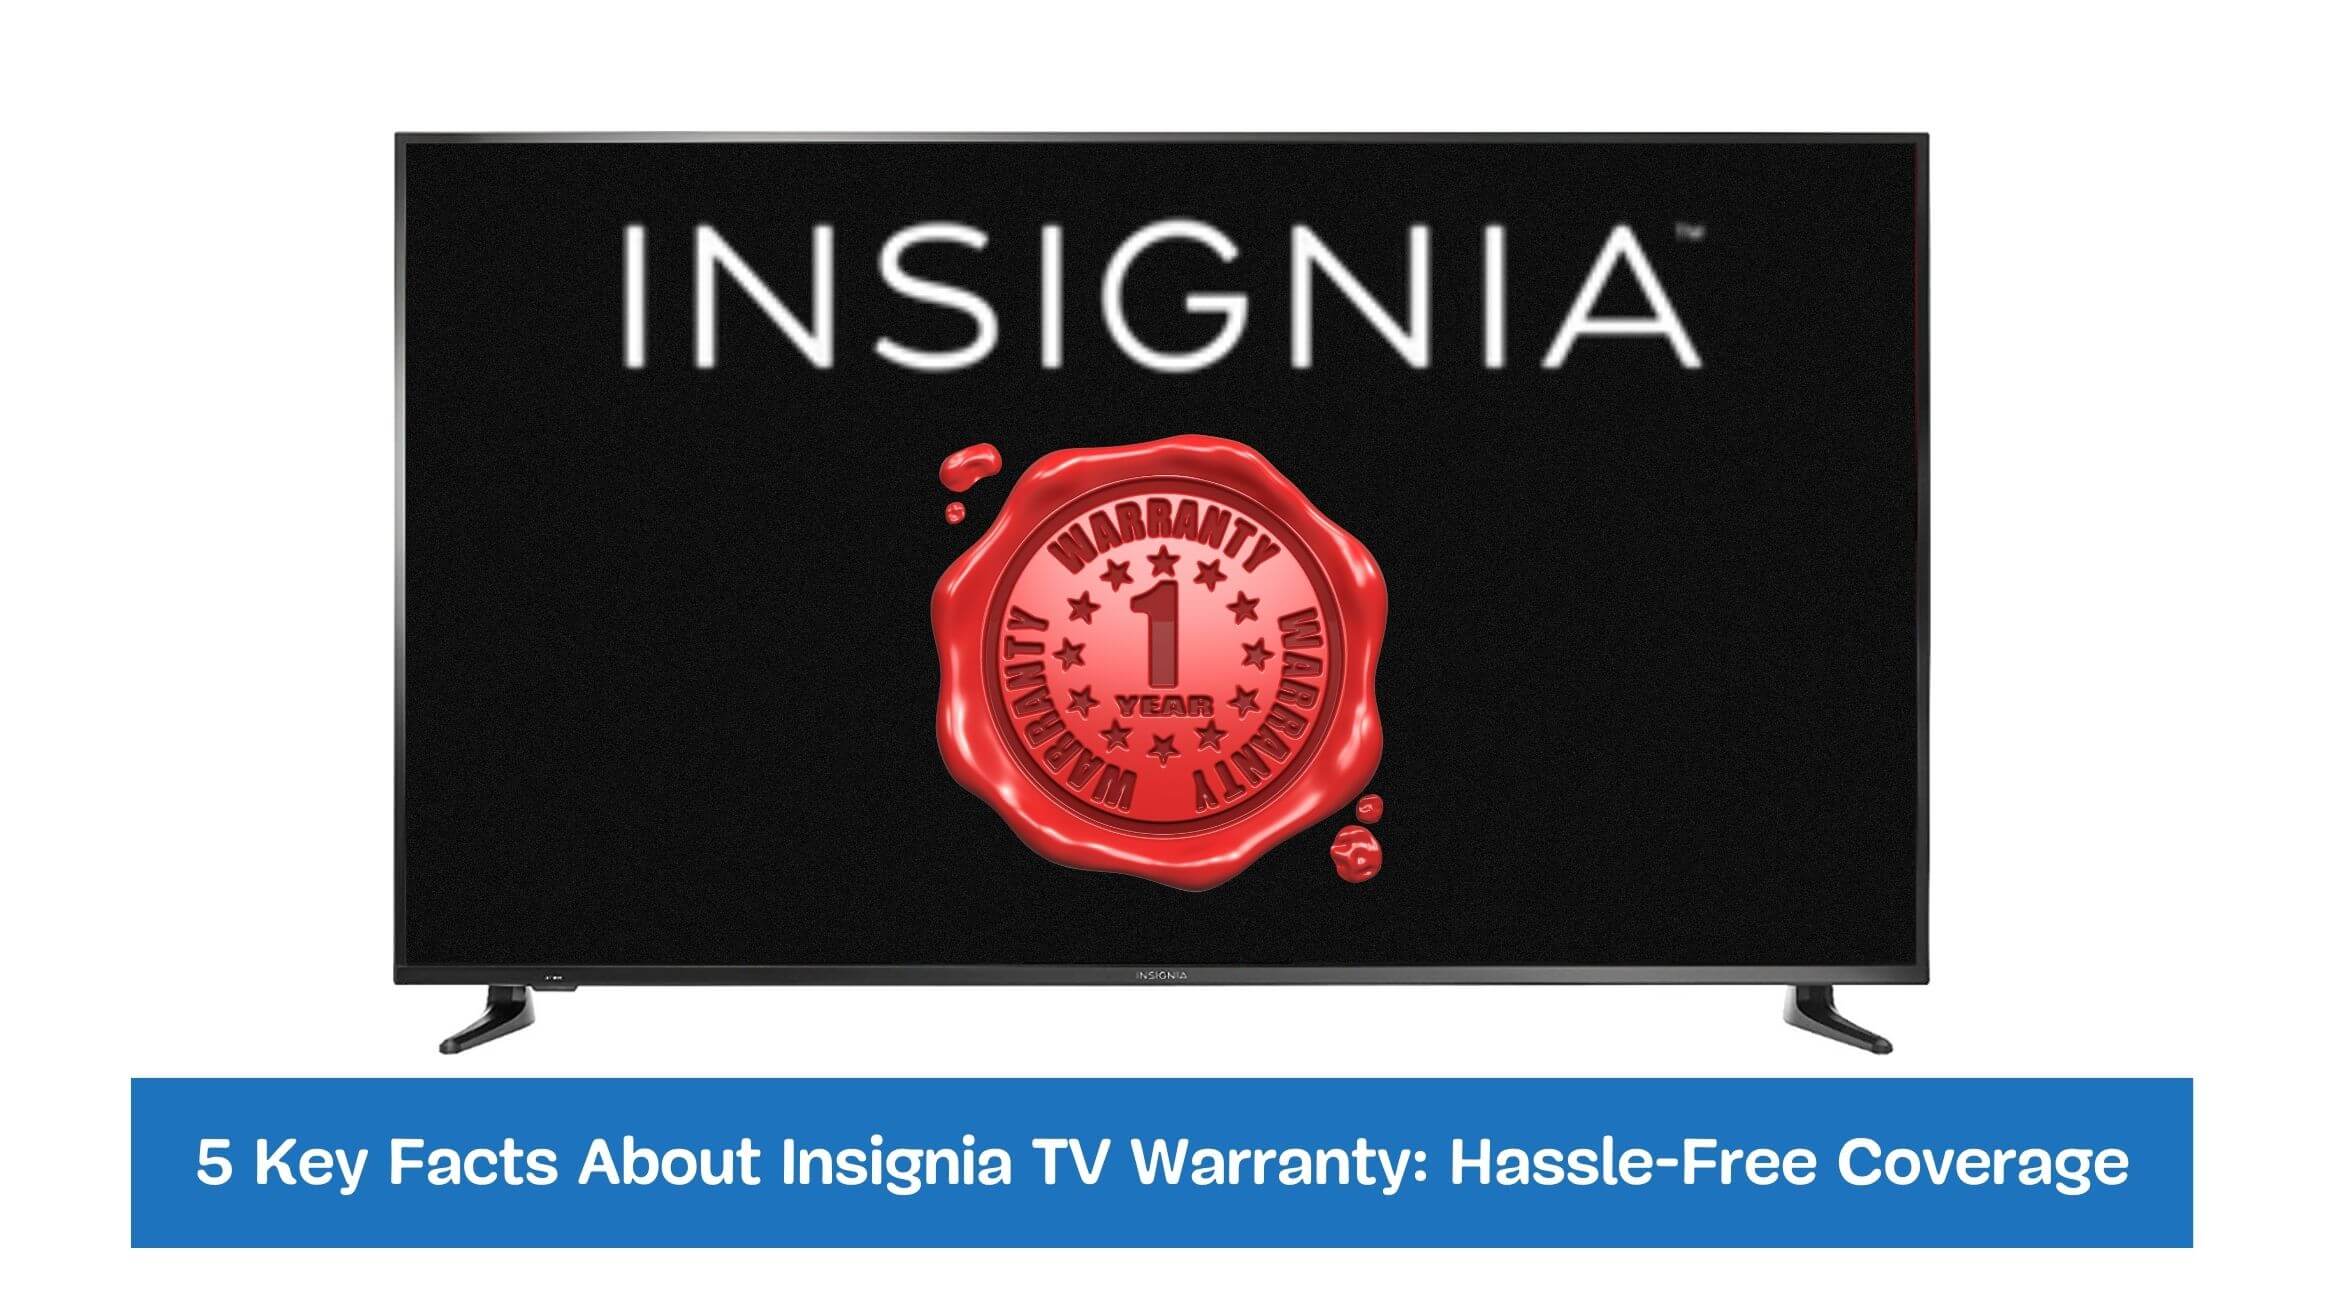 5 Key Facts About Insignia TV Warranty Hassle-Free Coverage